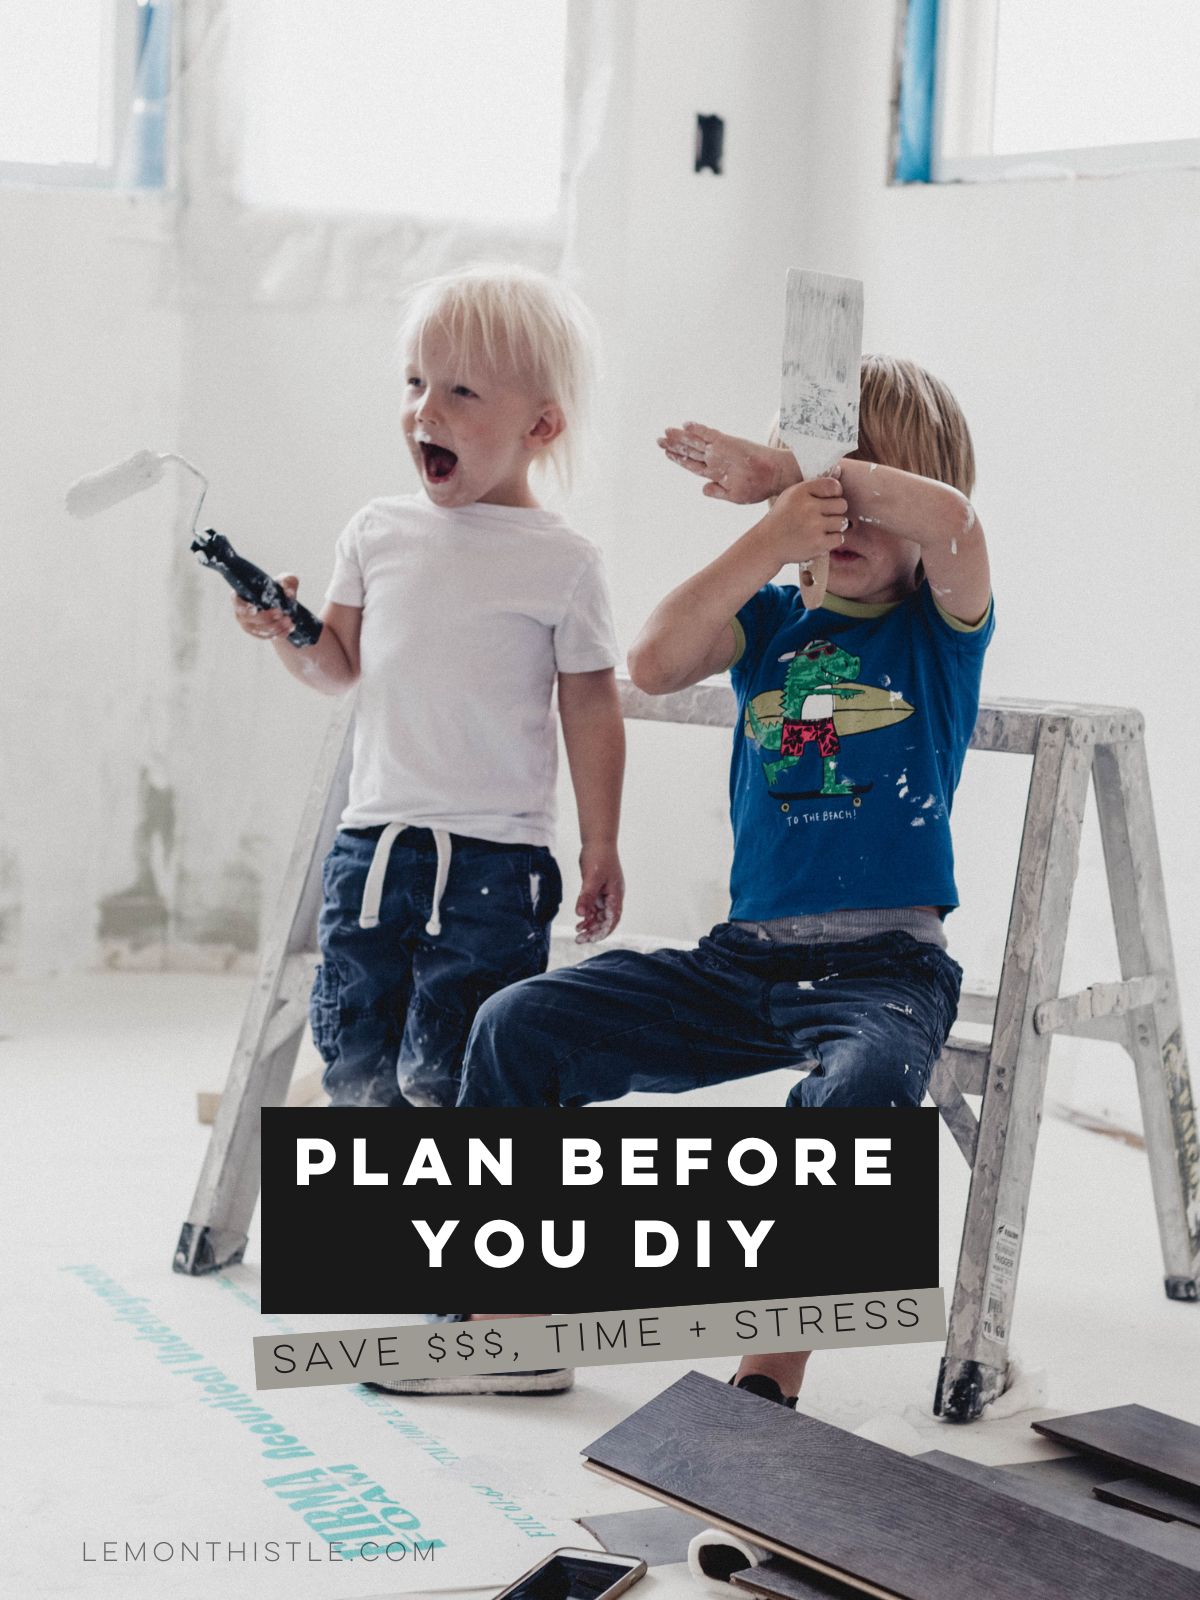 kids holding paint brush and paint roller. text over reads plan before you diy (save $$ time + stress)